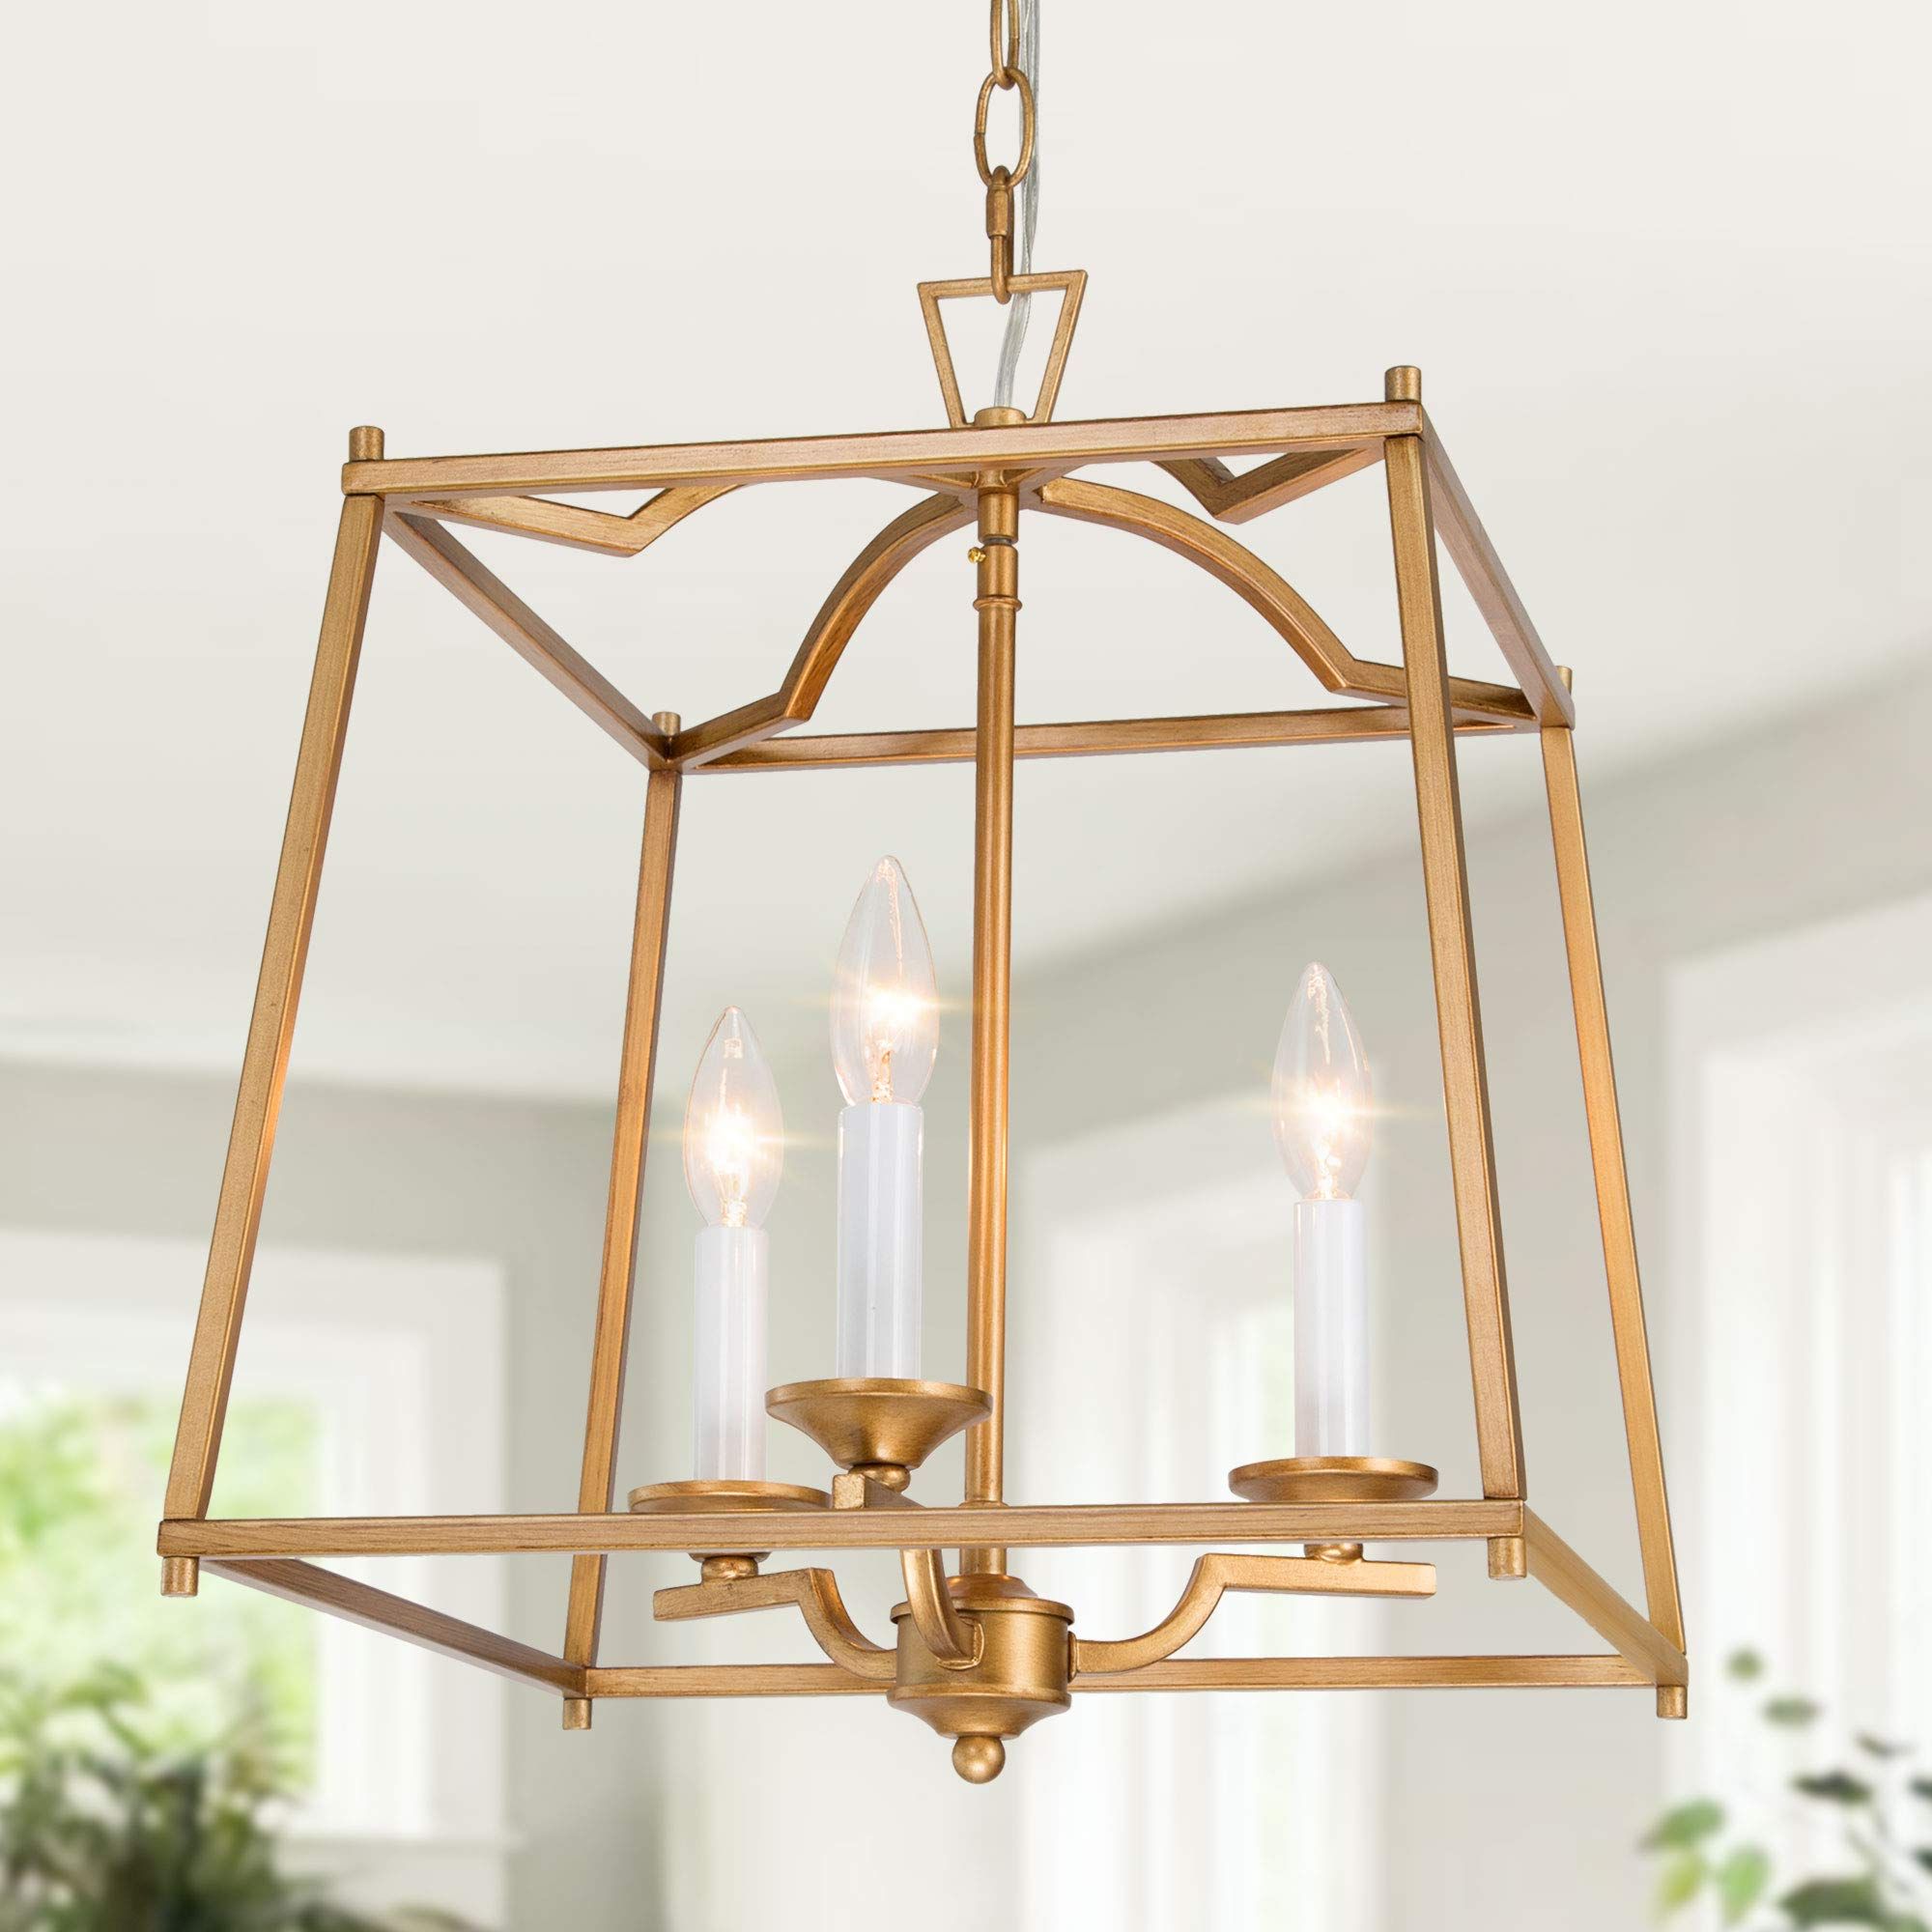 Well Known Ksana Gold Pendant Light Fixtures, Large Lantern Chandelier, Foyer Pendant  Lighting For Kitchen Island, Hallway And Entryway,  (View 11 of 15)